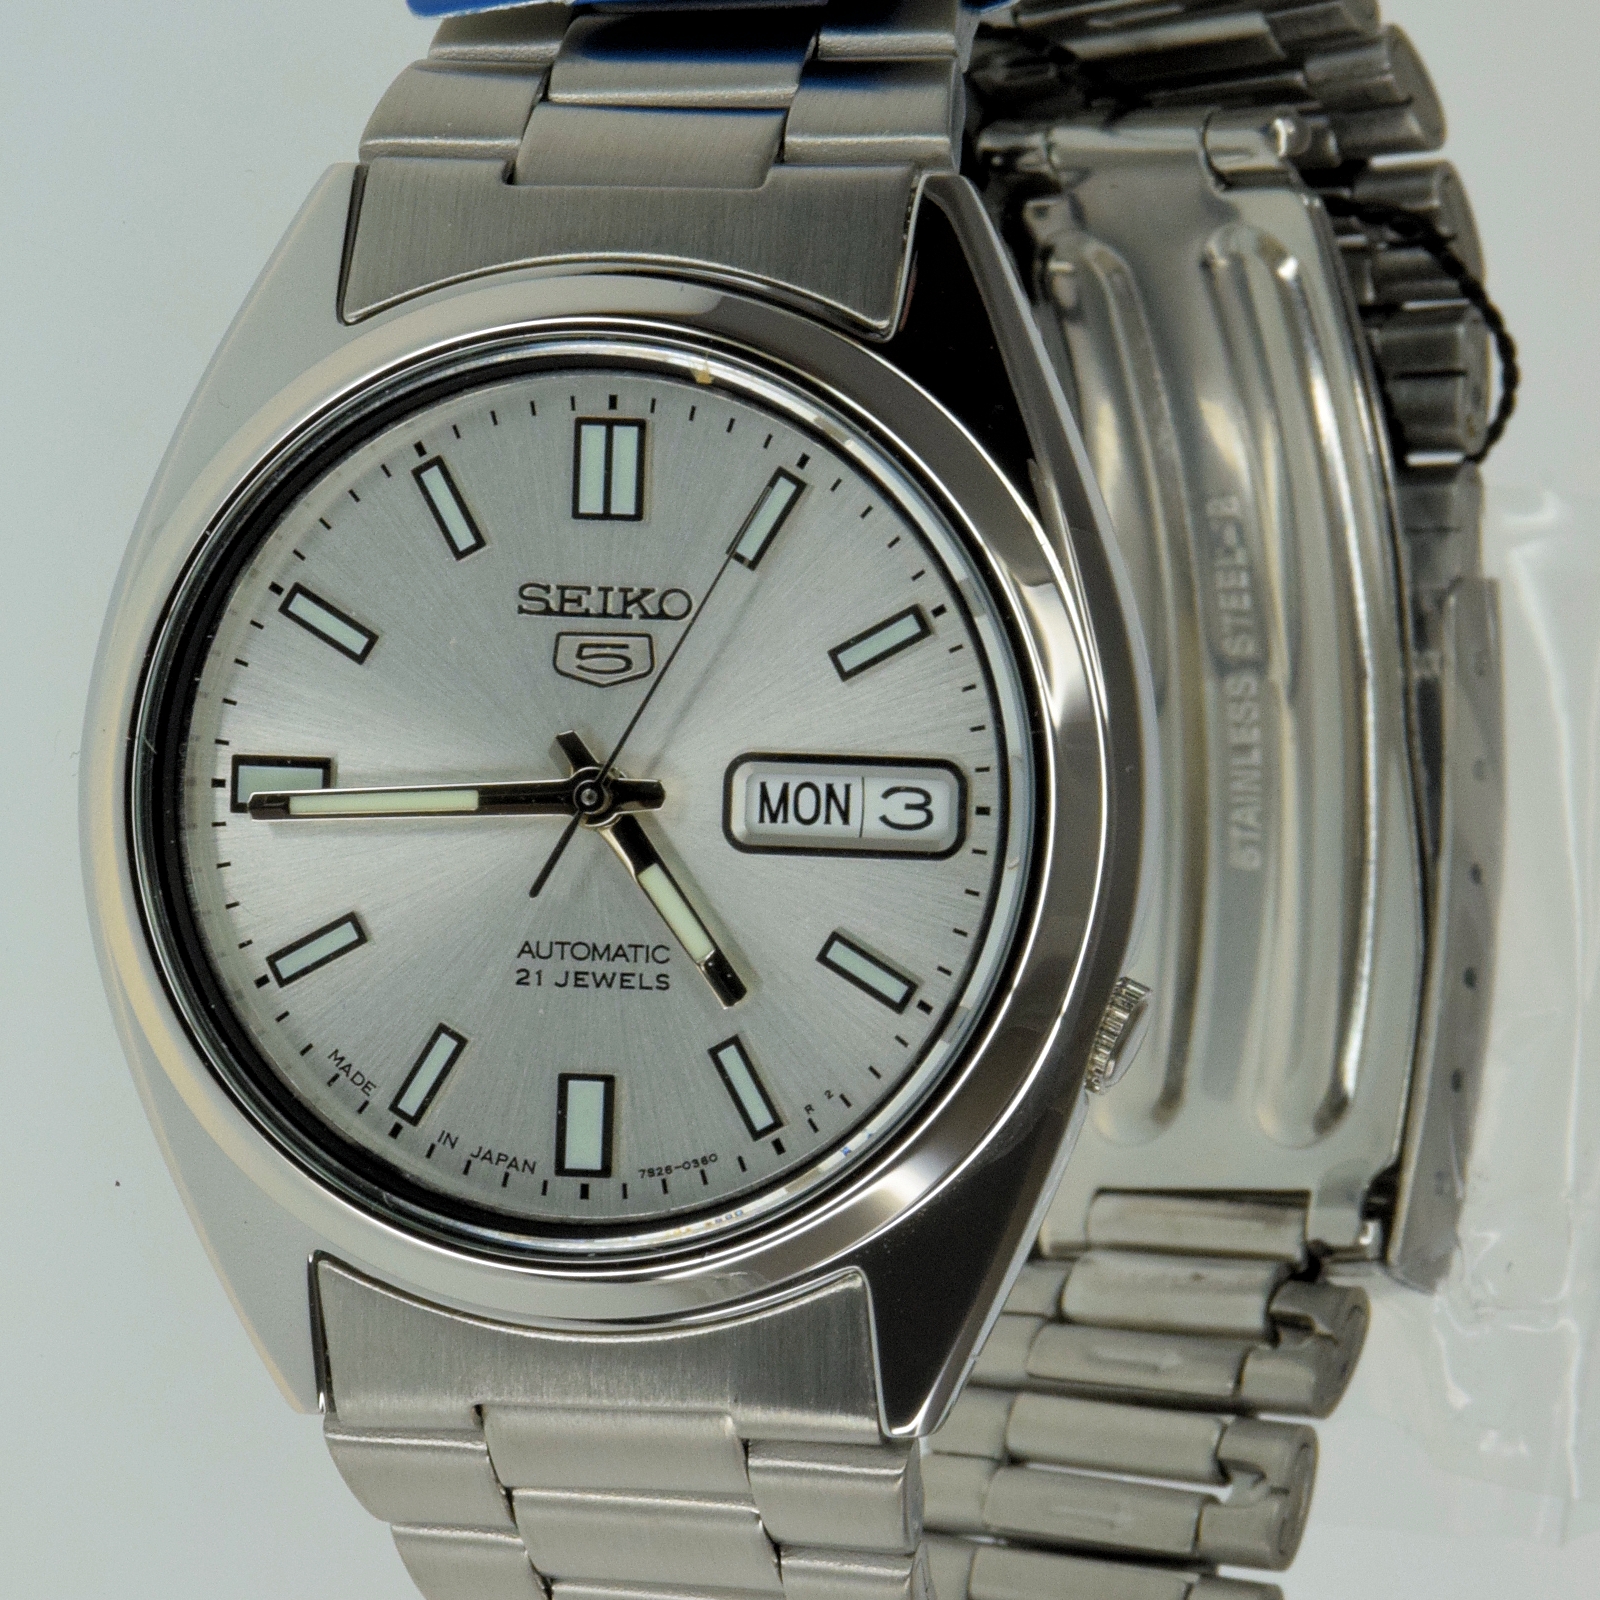 Albums 90+ Wallpaper Seiko 5 Automatic 21 Jewels Price Made In Japan ...